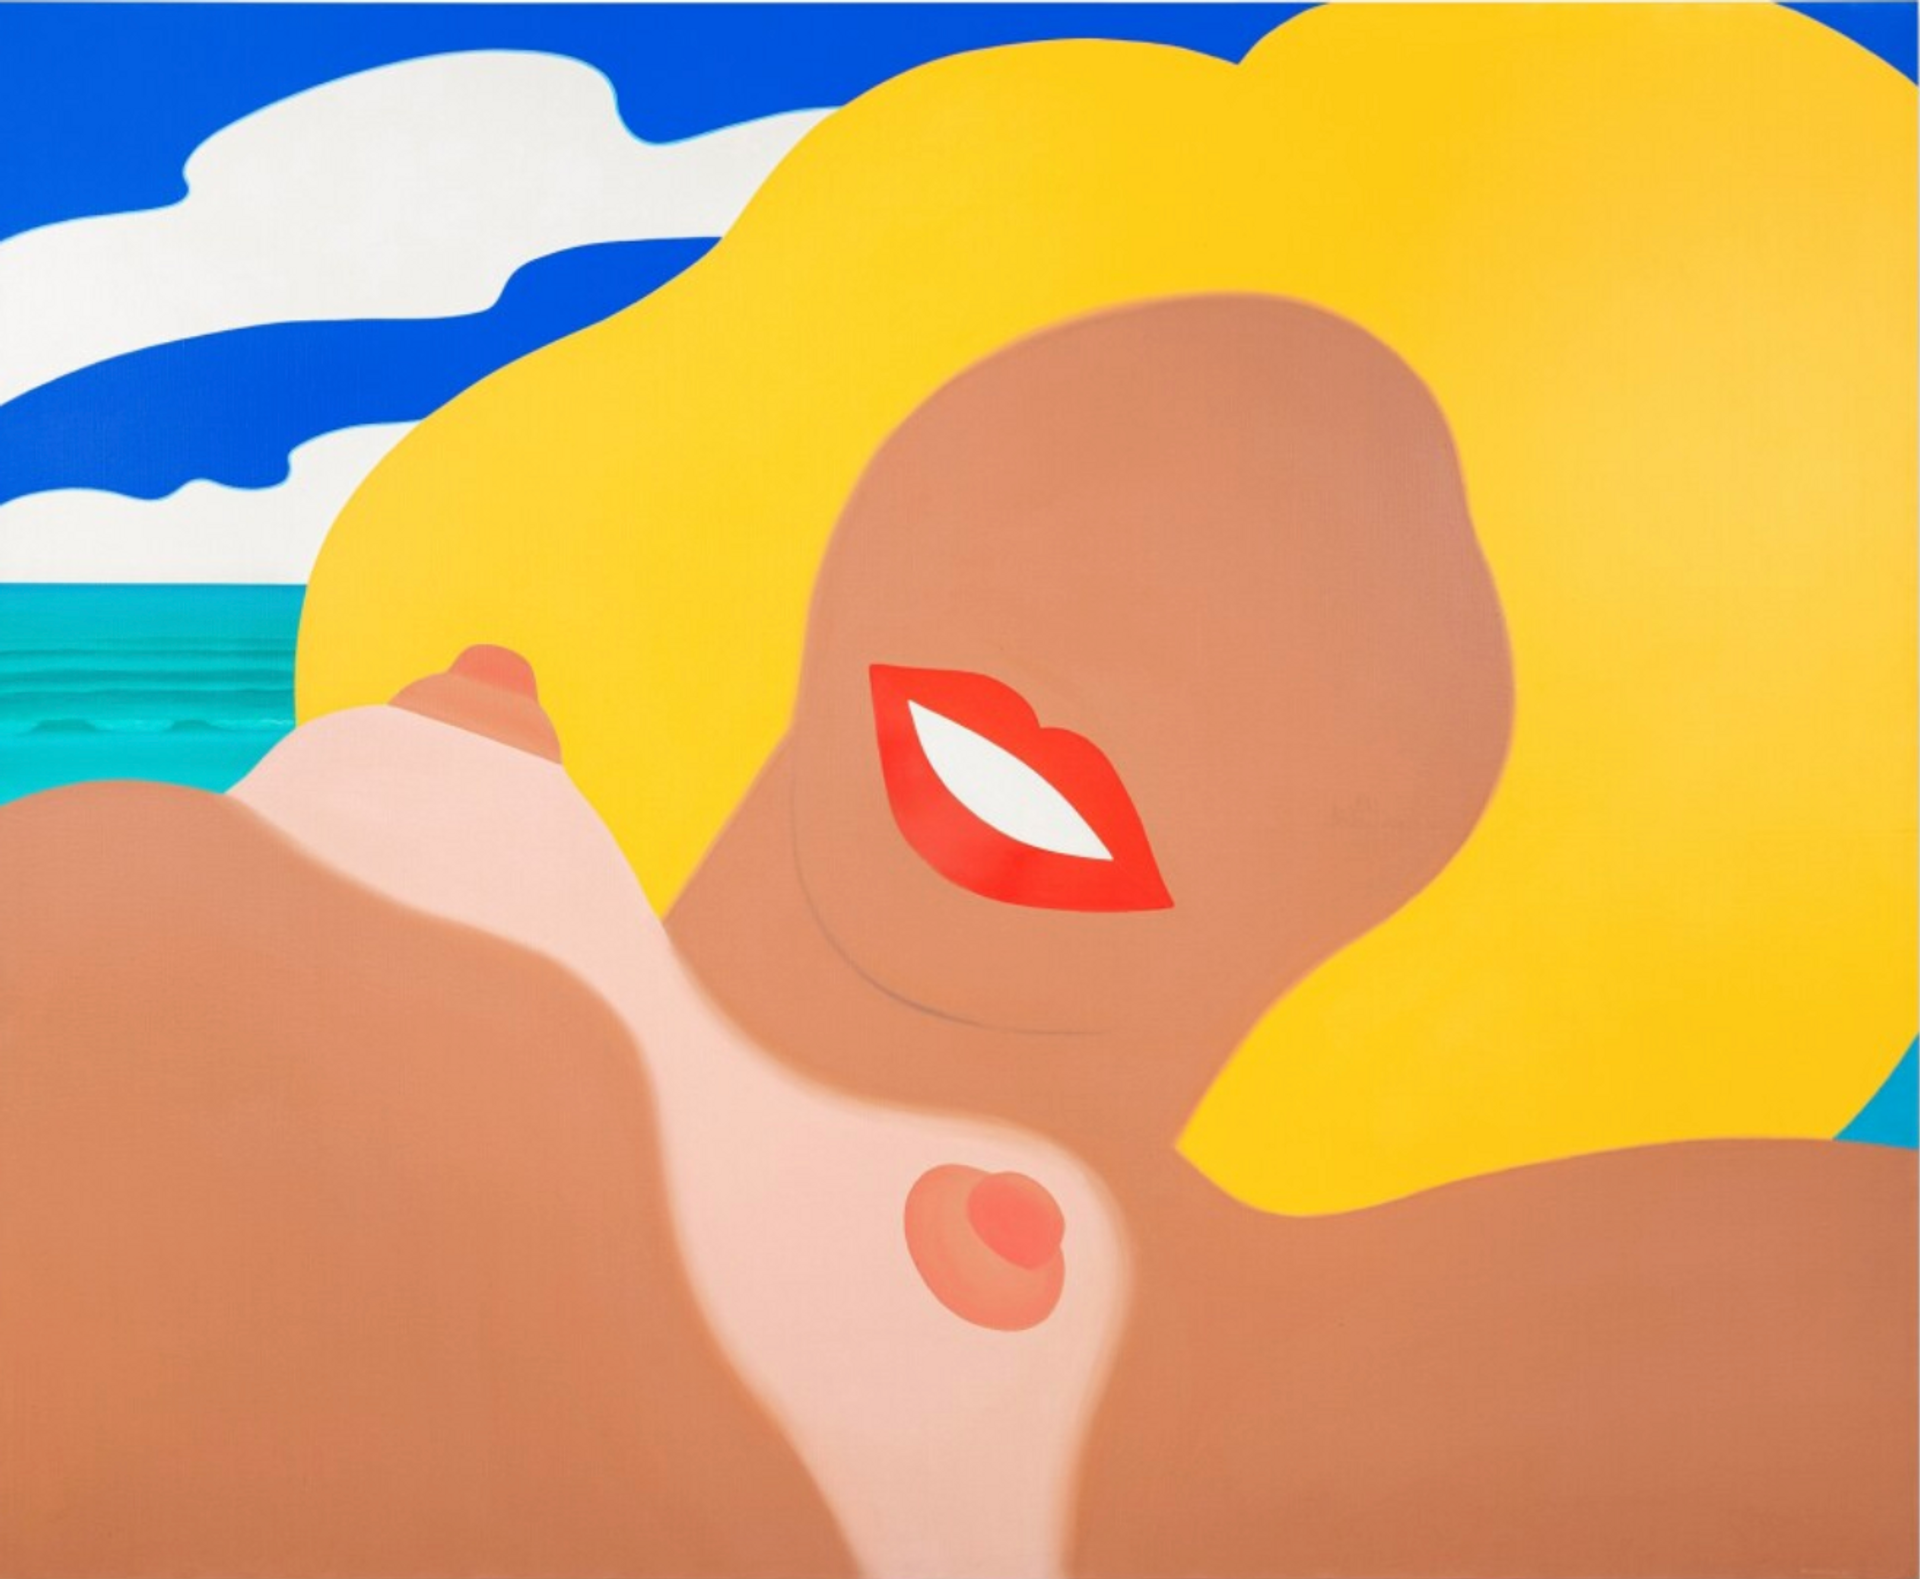 Great American Nude no. 73 by Tom Wesselmann